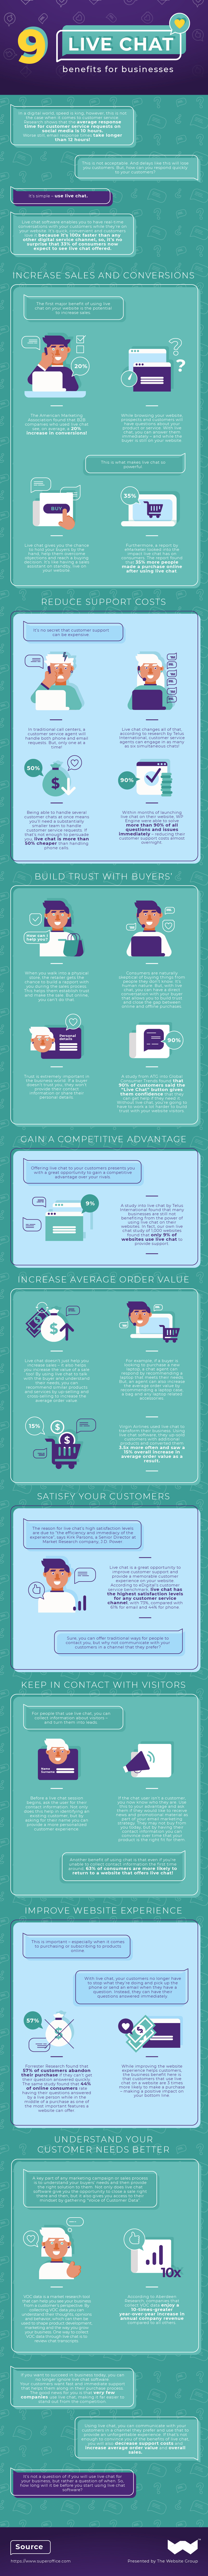 9 livechat benefits for businesses infographic